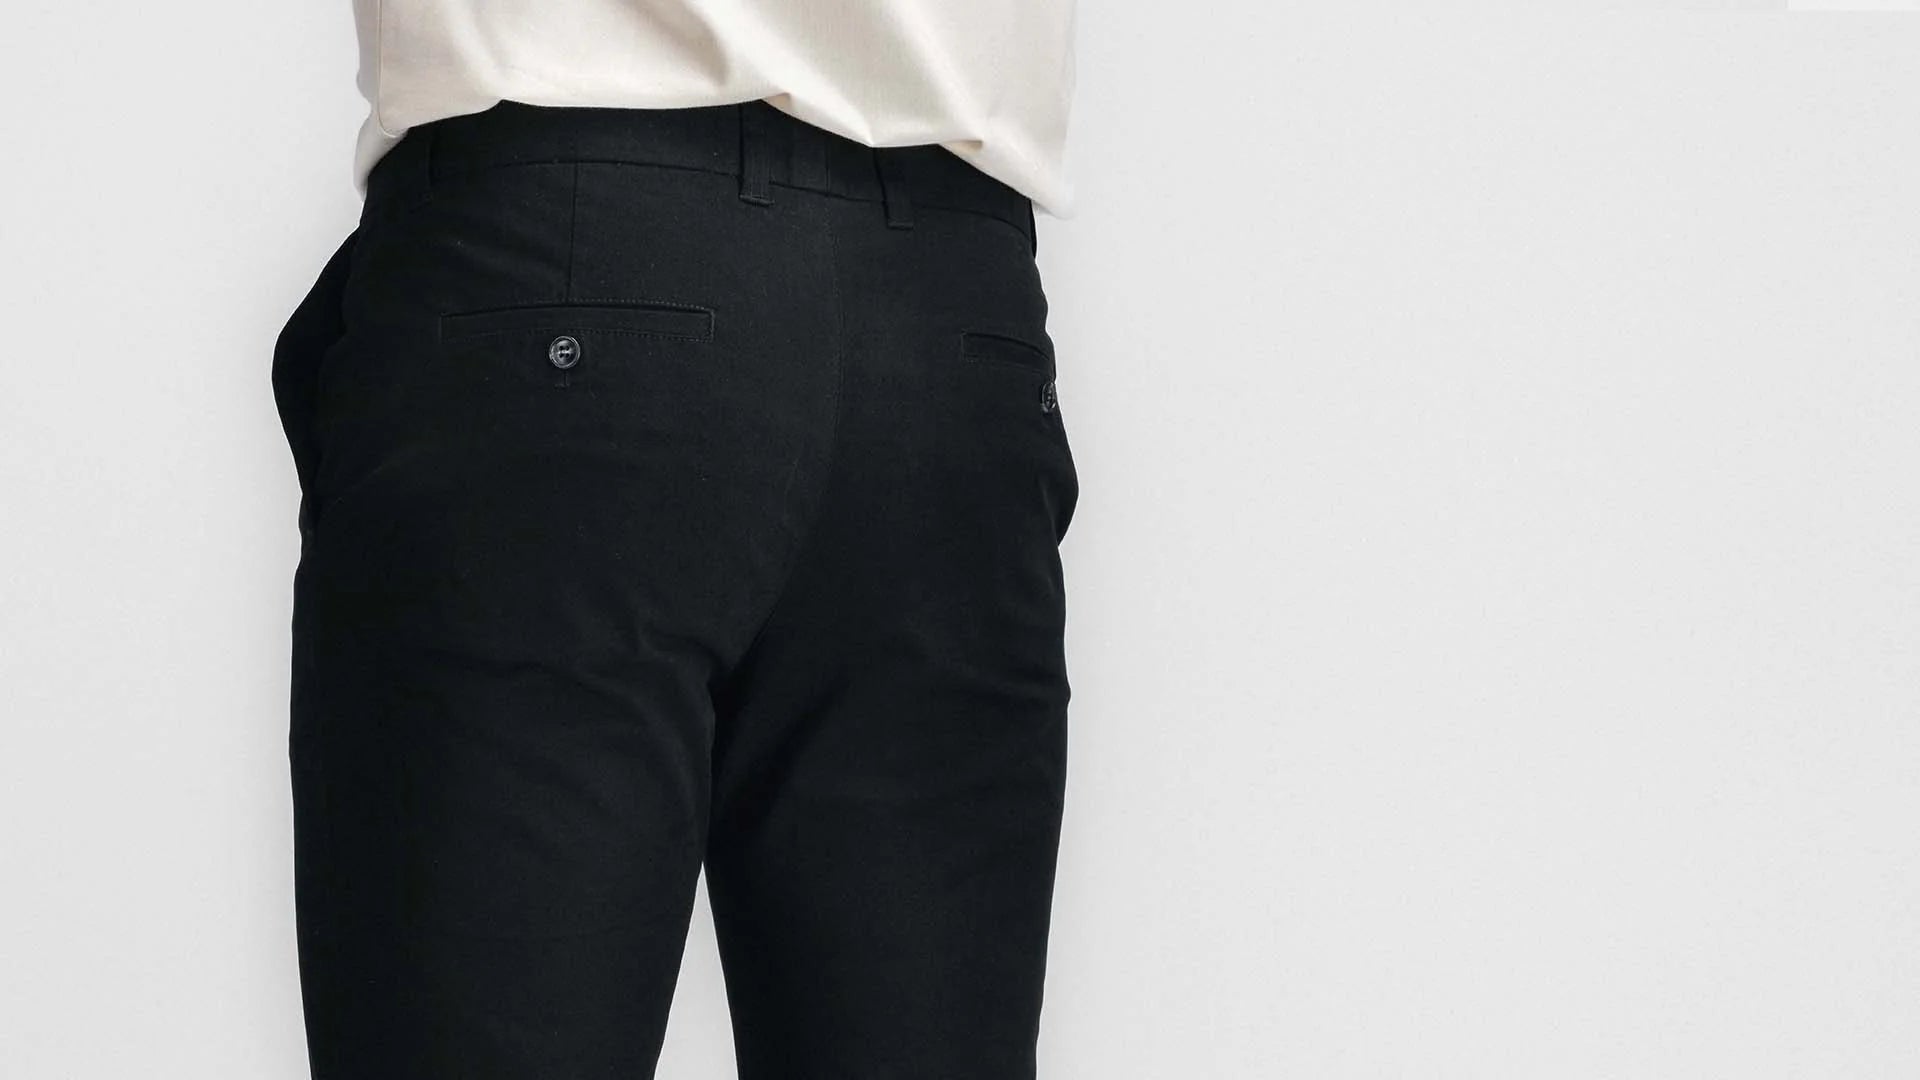 Pants designed especially for tall men - We guarantee a good fit! –  MediumTall Clothing